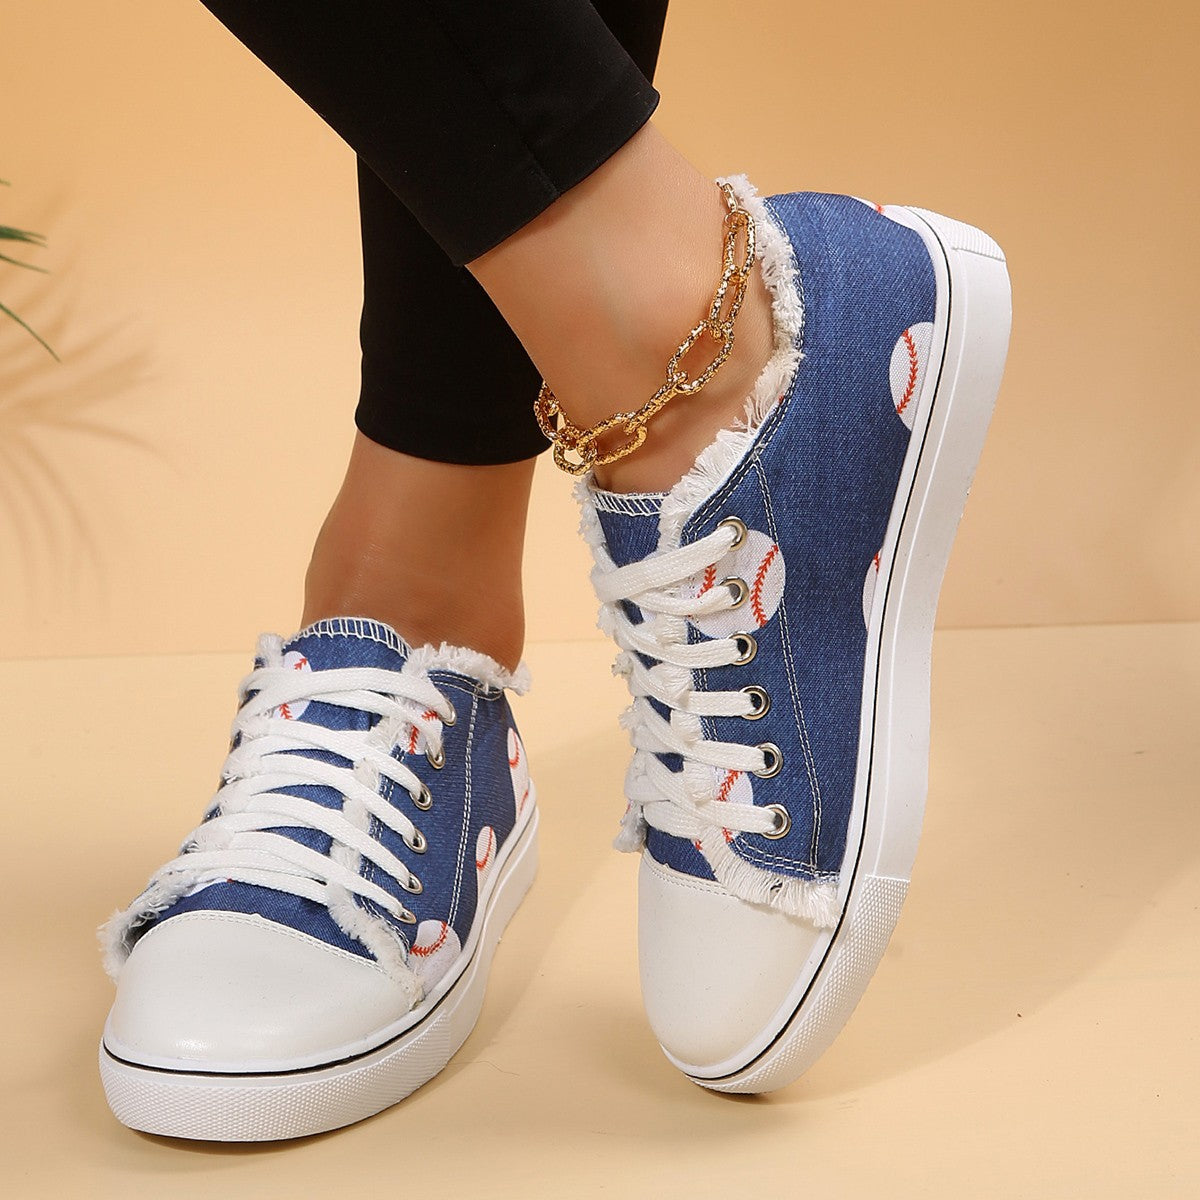 Trainers & Sneakers  | Casual Flat Canvas Shoes Flowers Lace-up Flowers Print Loafers Women Walking Shoes | Denim Ball |  36.| thecurvestory.myshopify.com